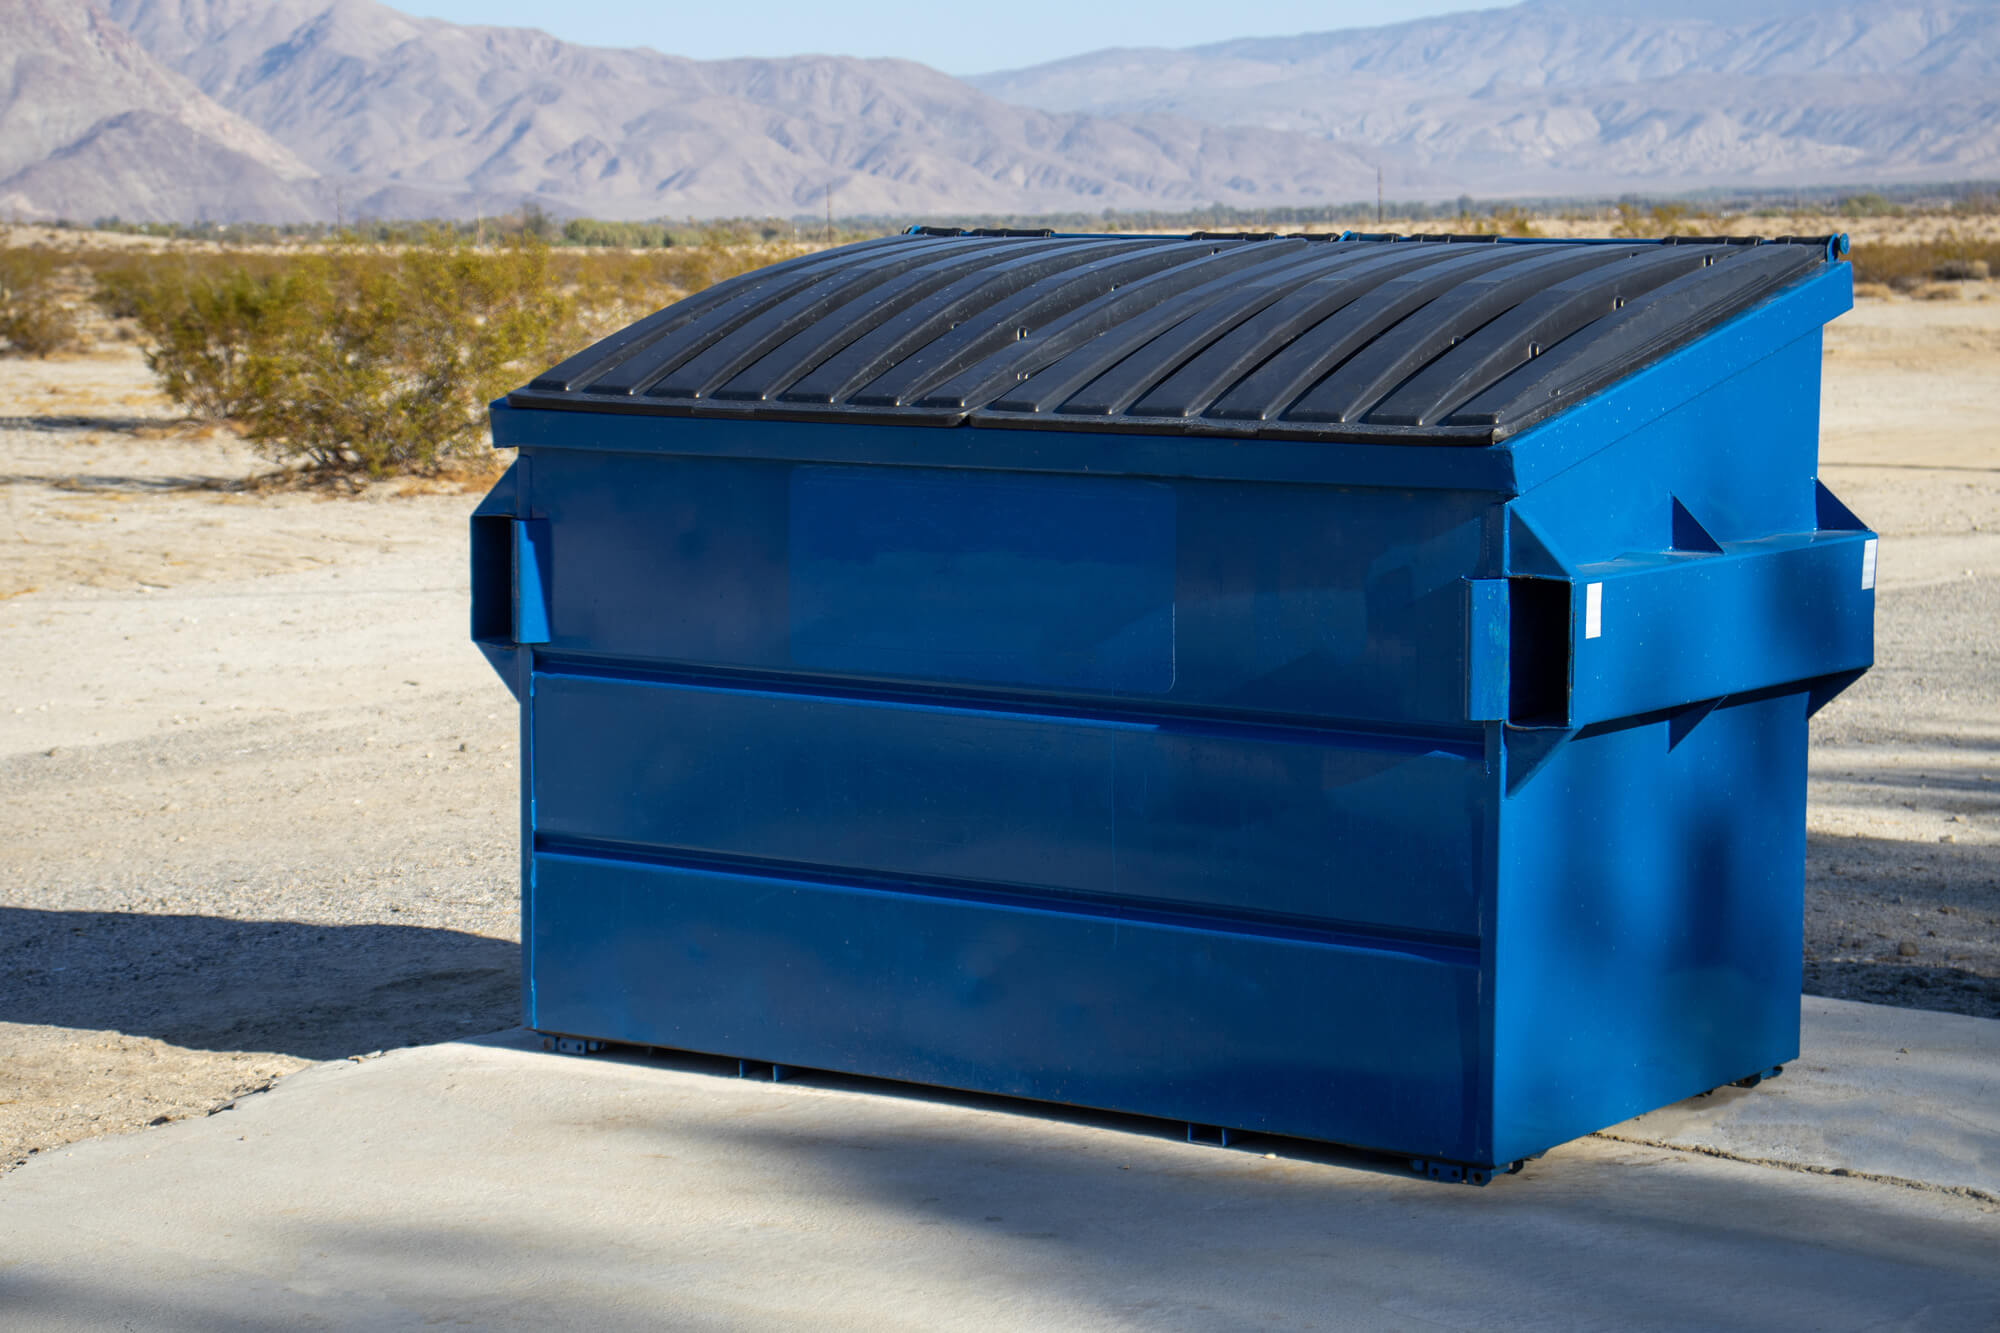 A large blue commercial dumpster for trash or recycling.